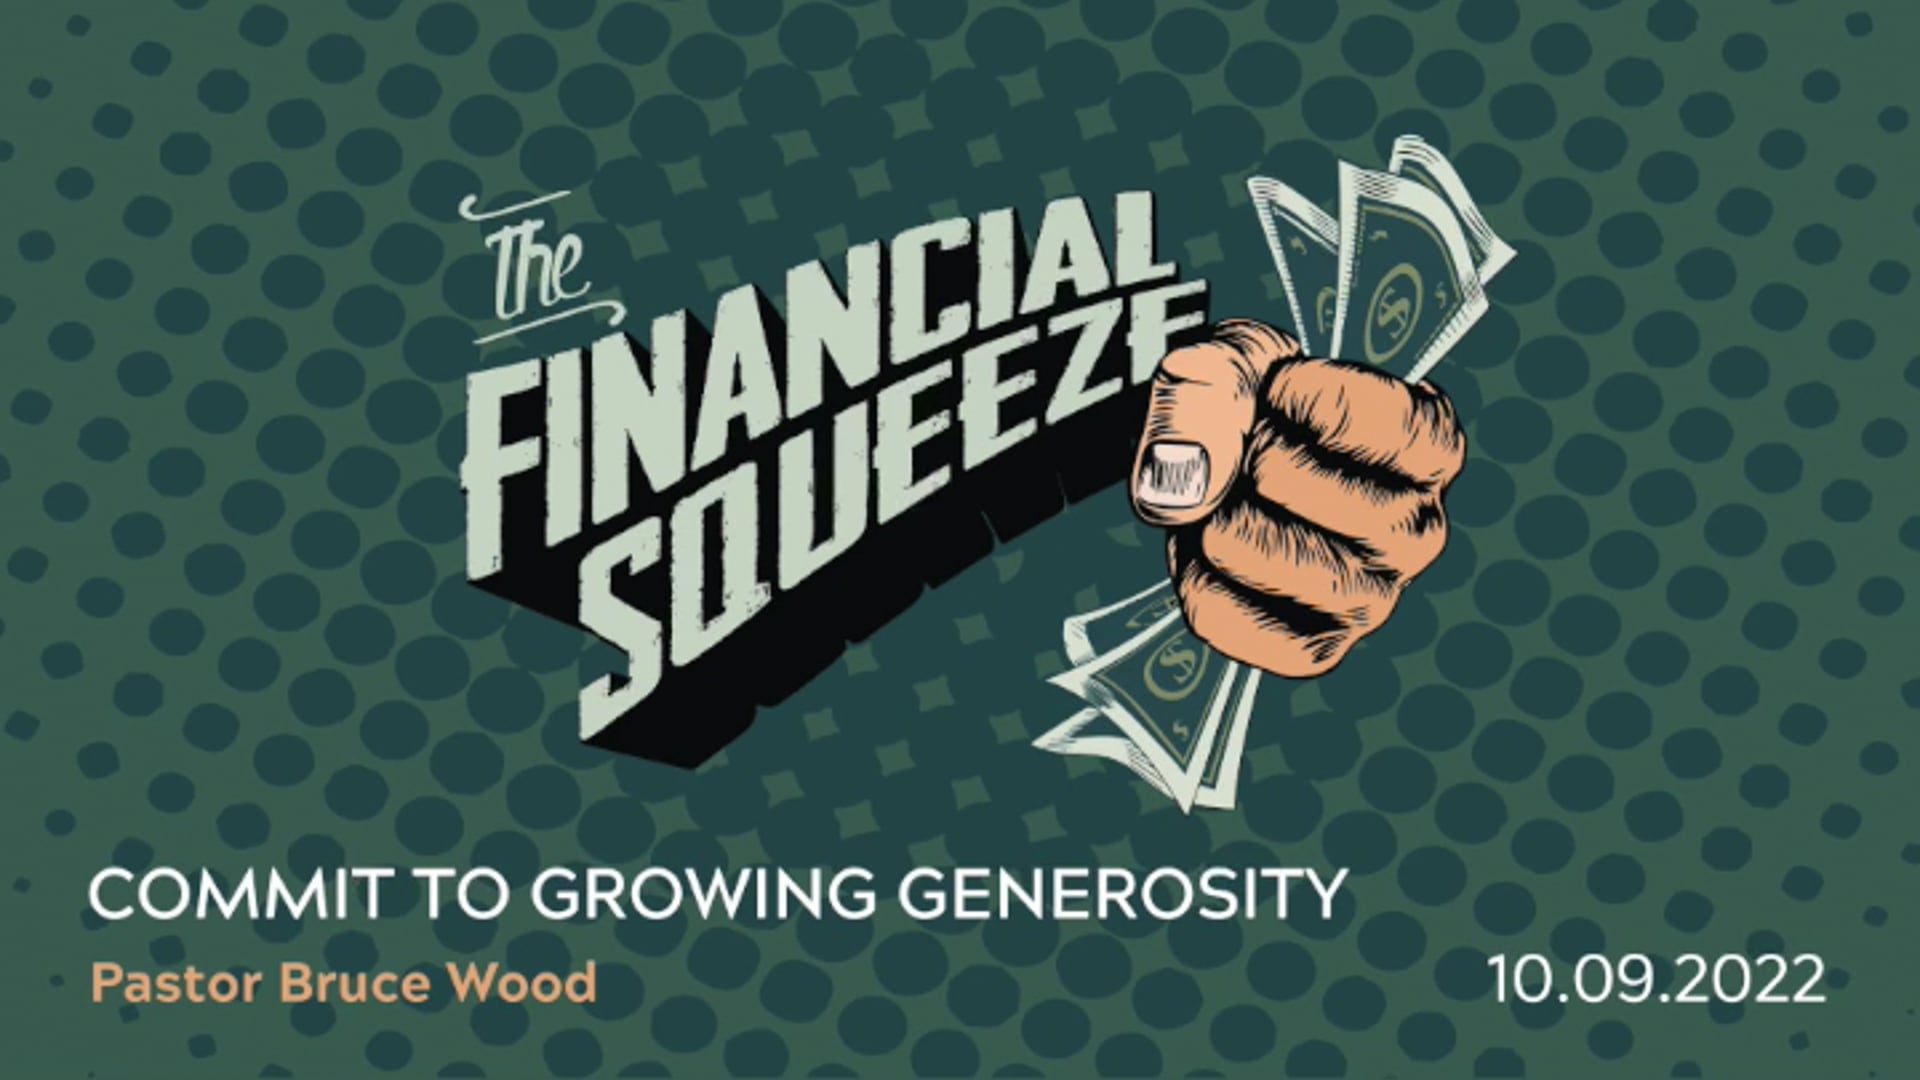 The Financial Squeeze - Part 4: Commit to Generosity